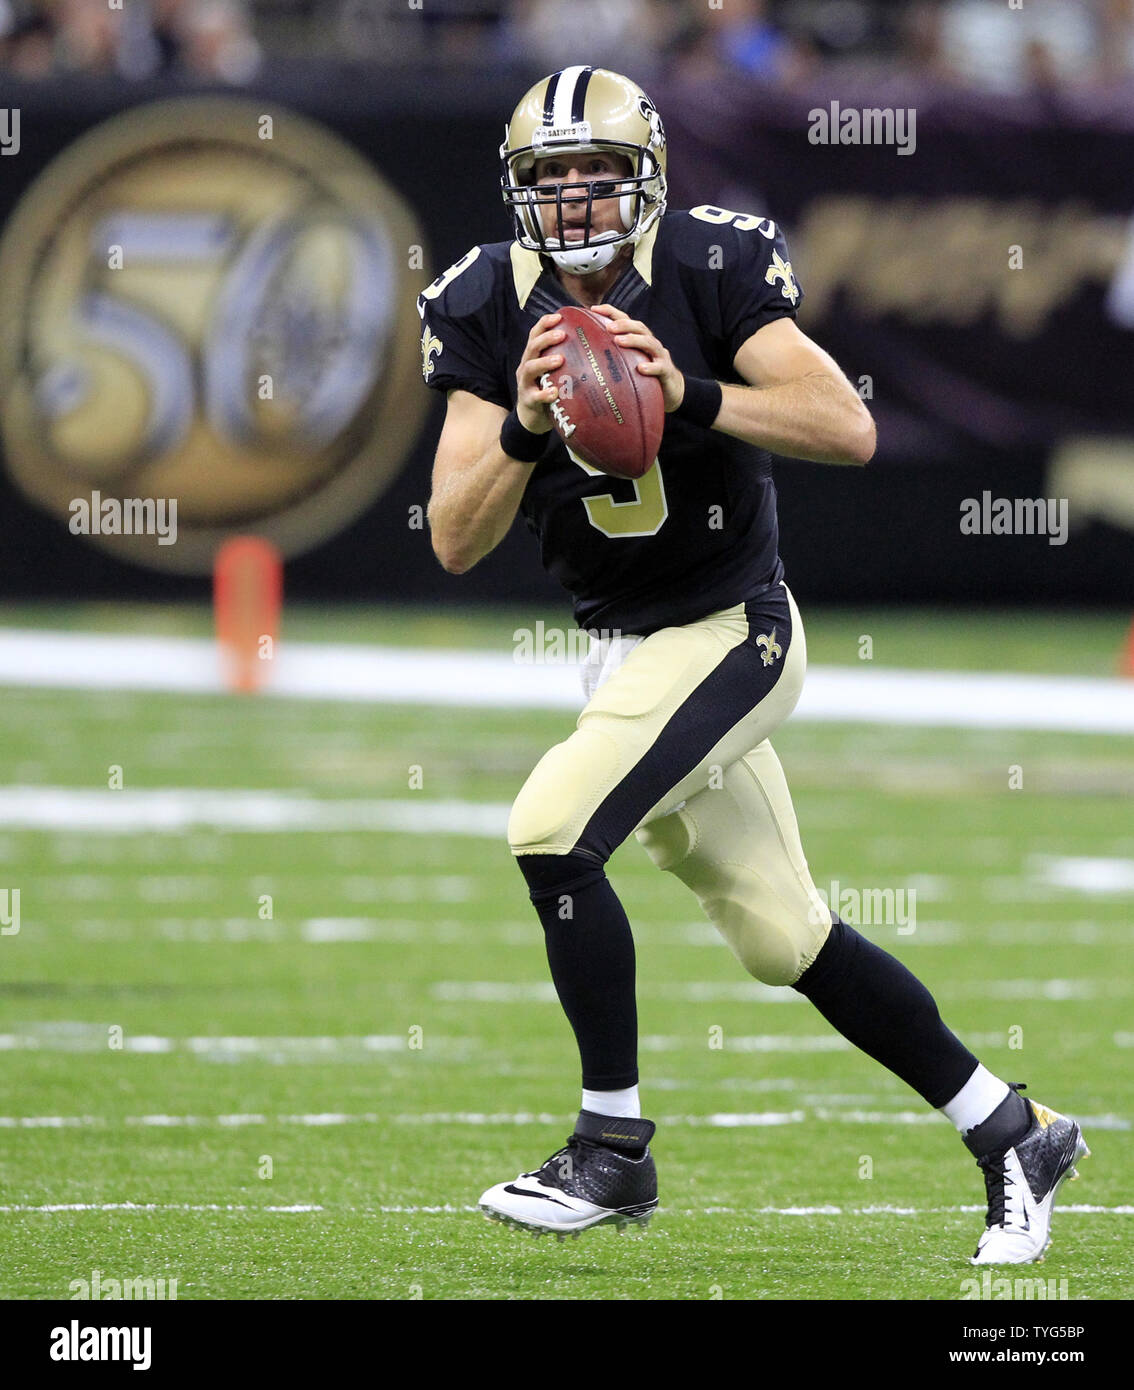 New Orleans Saints quarterback Drew Brees (9) throws the ball down the  field against the Philadelphia Eagles at the Mercedes-Benz Superdome in New  Orleans, Louisiana on November 5, 2012. Brees threw a